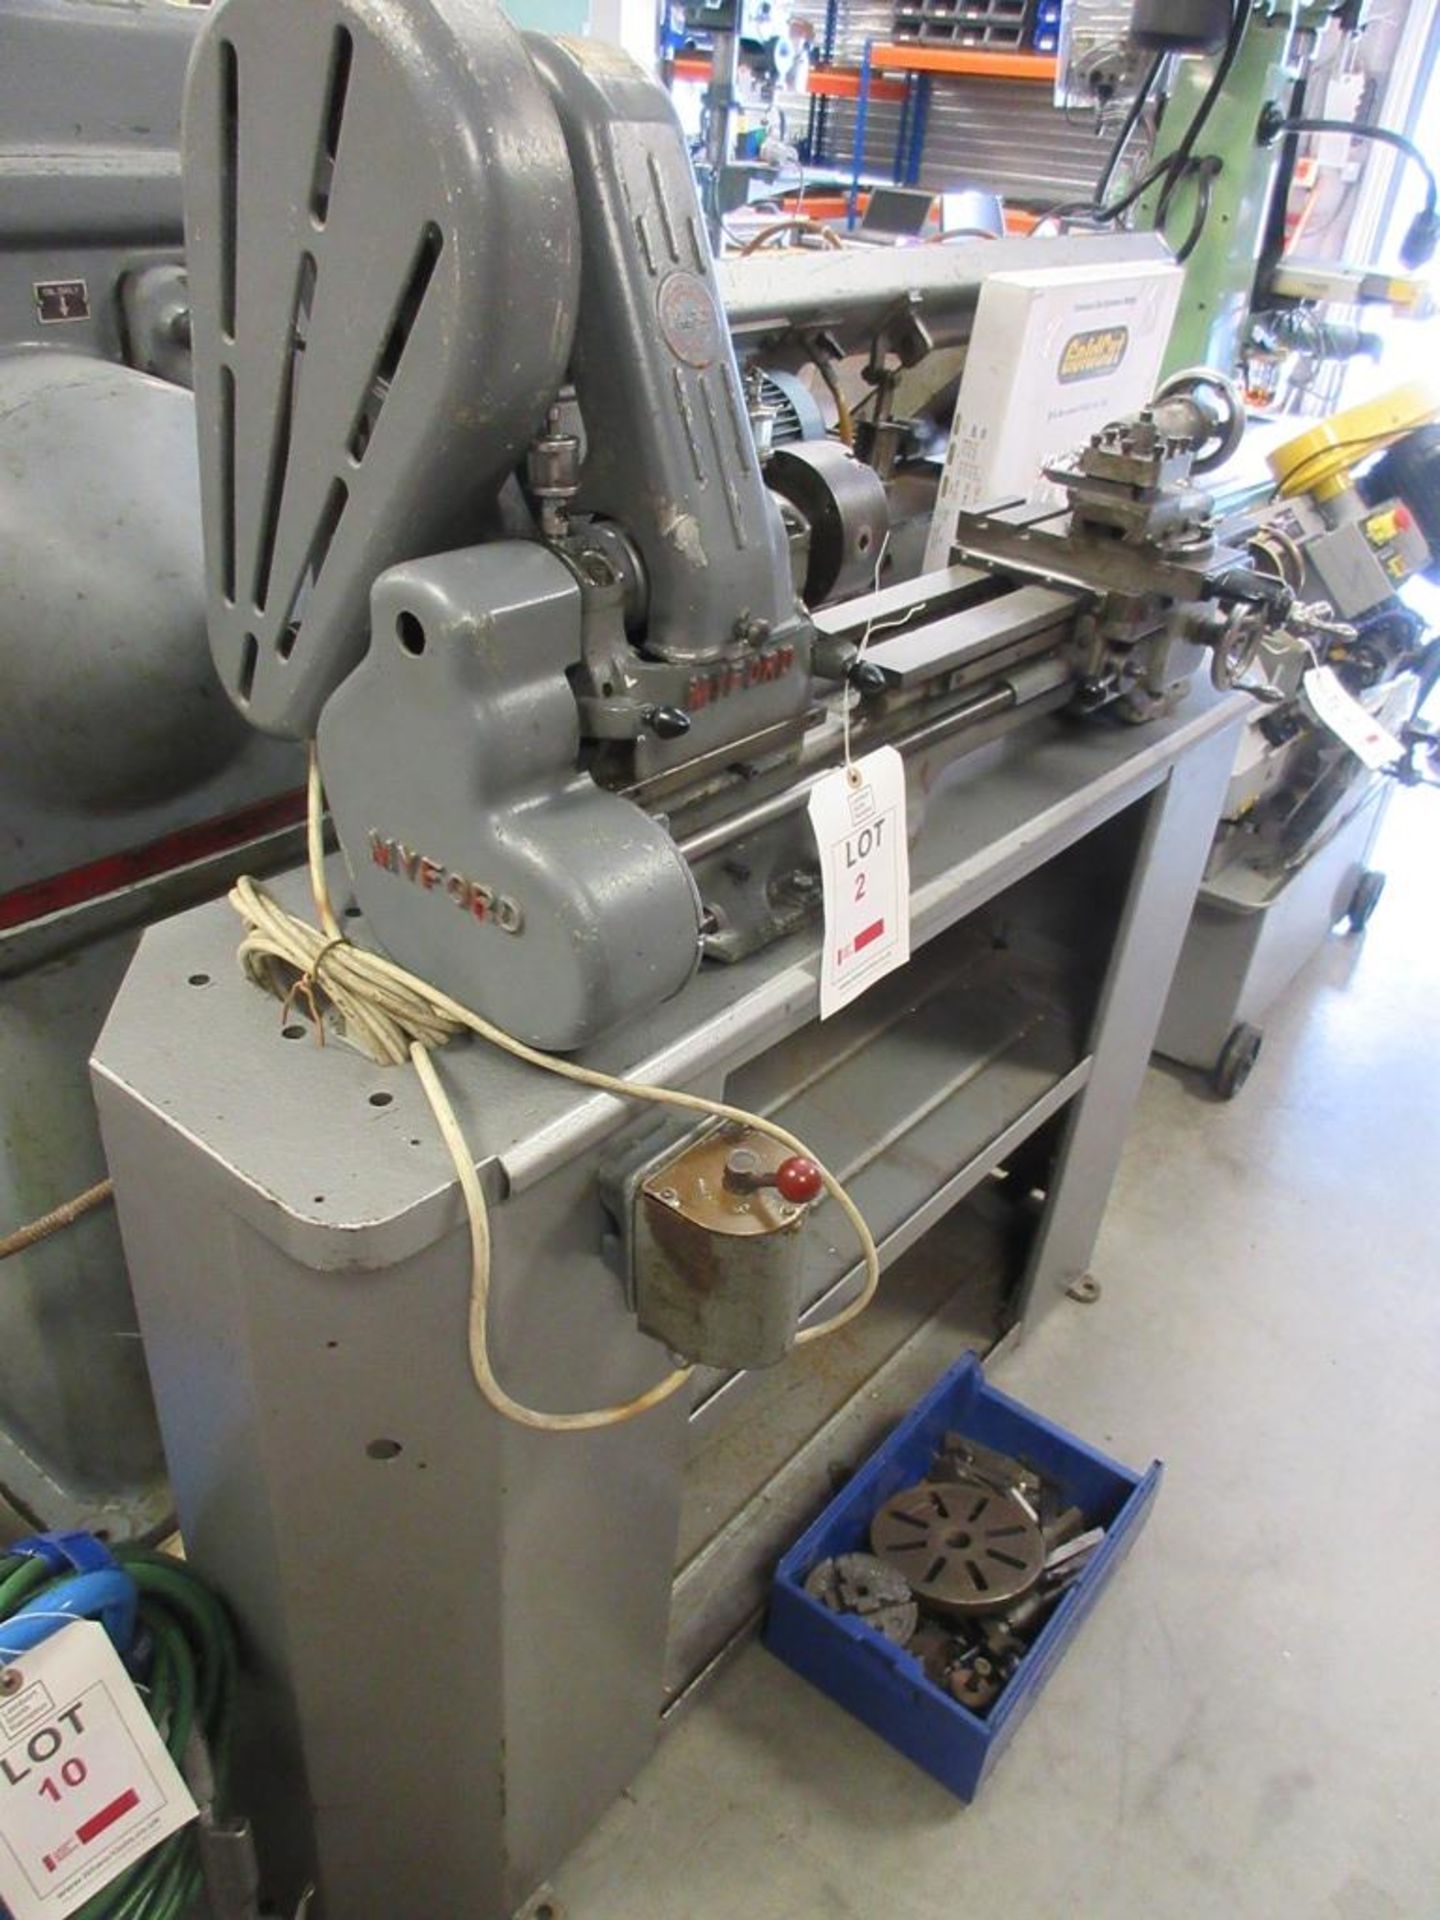 Myford Lathe ML7 240V 3 Jaw, 4 Jaw & Faceplate - Image 4 of 5